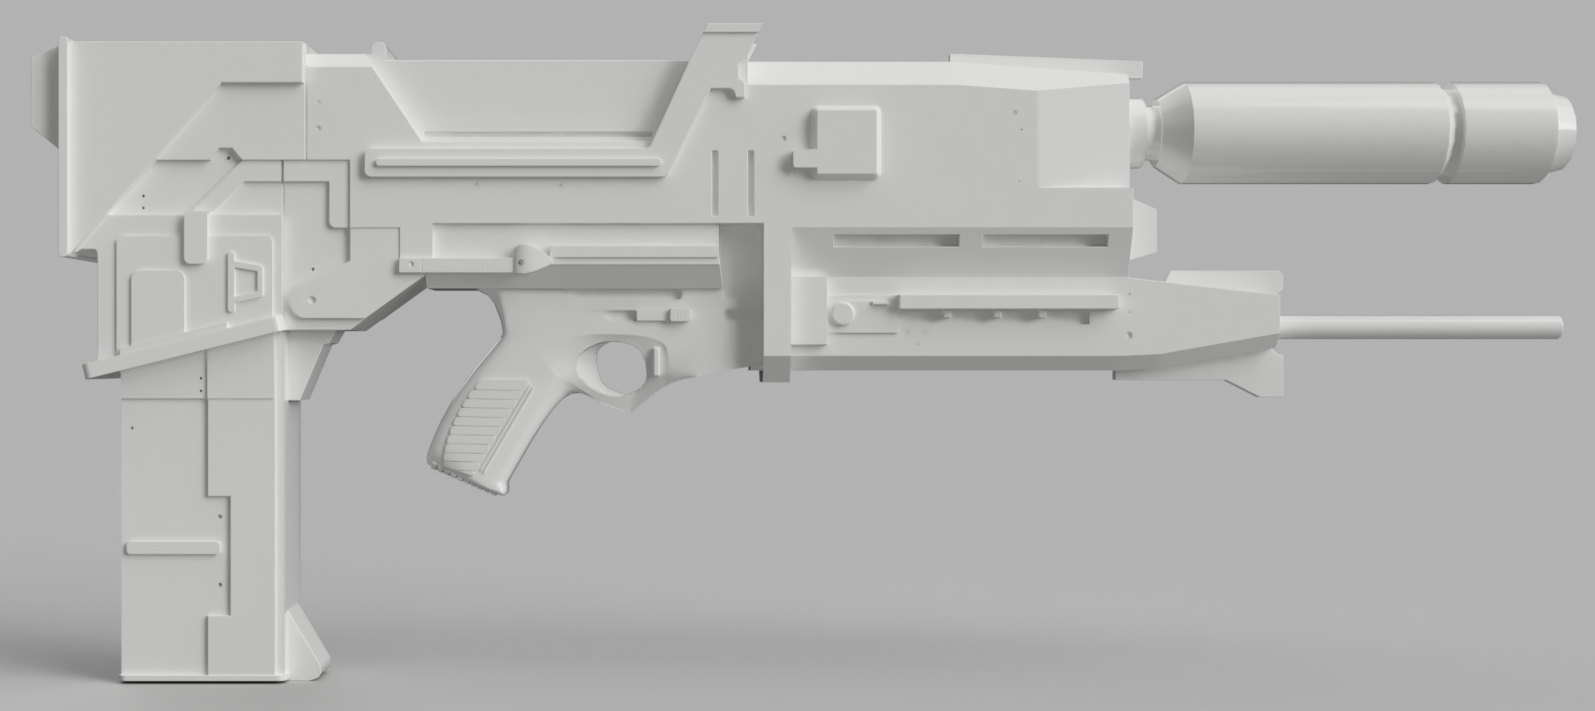 Terminator M-95A1 Phased Plasma Rifle - Download Free 3D model by